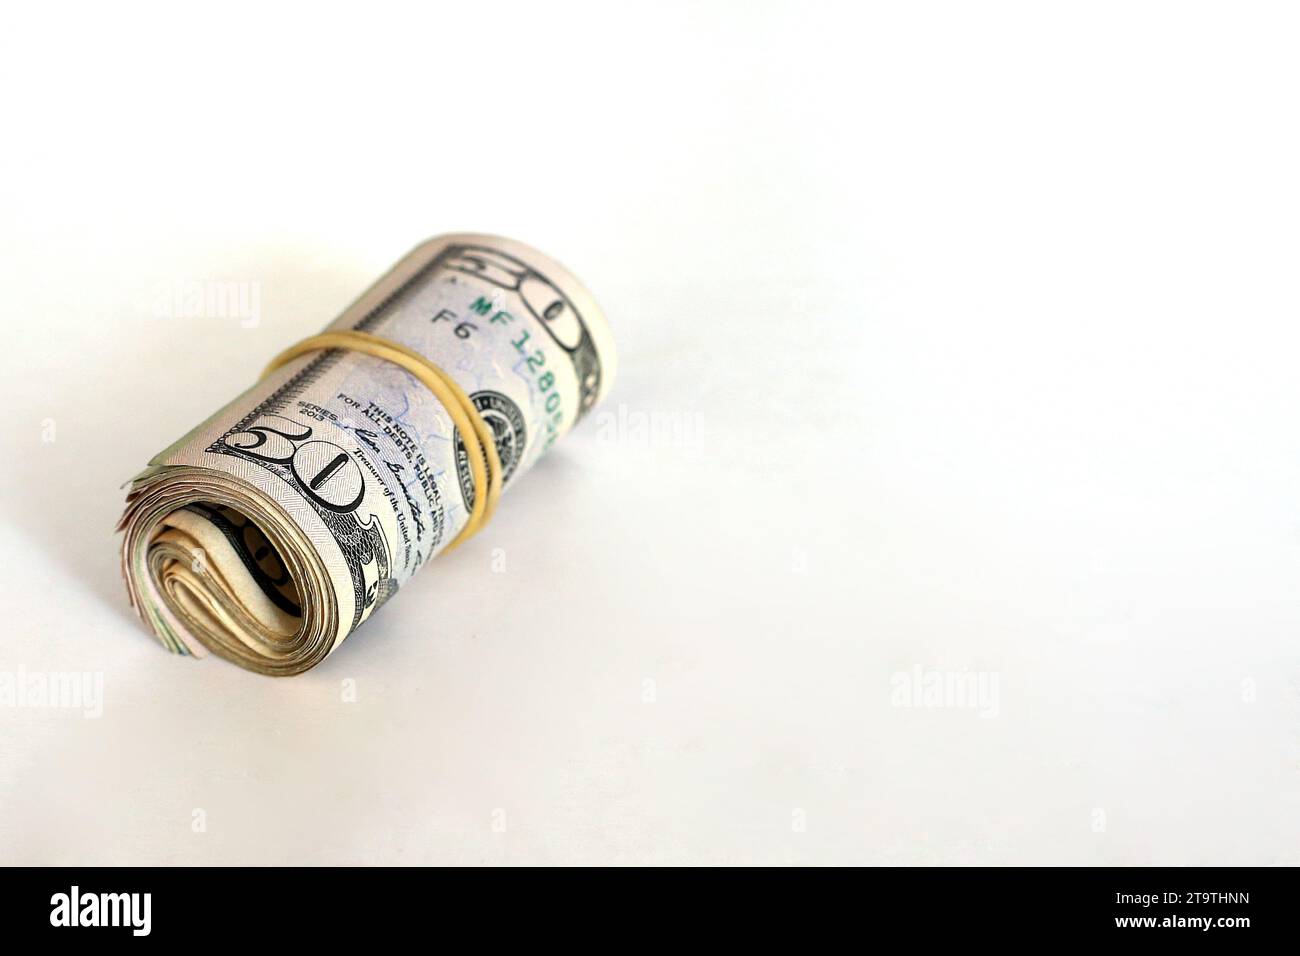 A roll of money on a white background Stock Photo